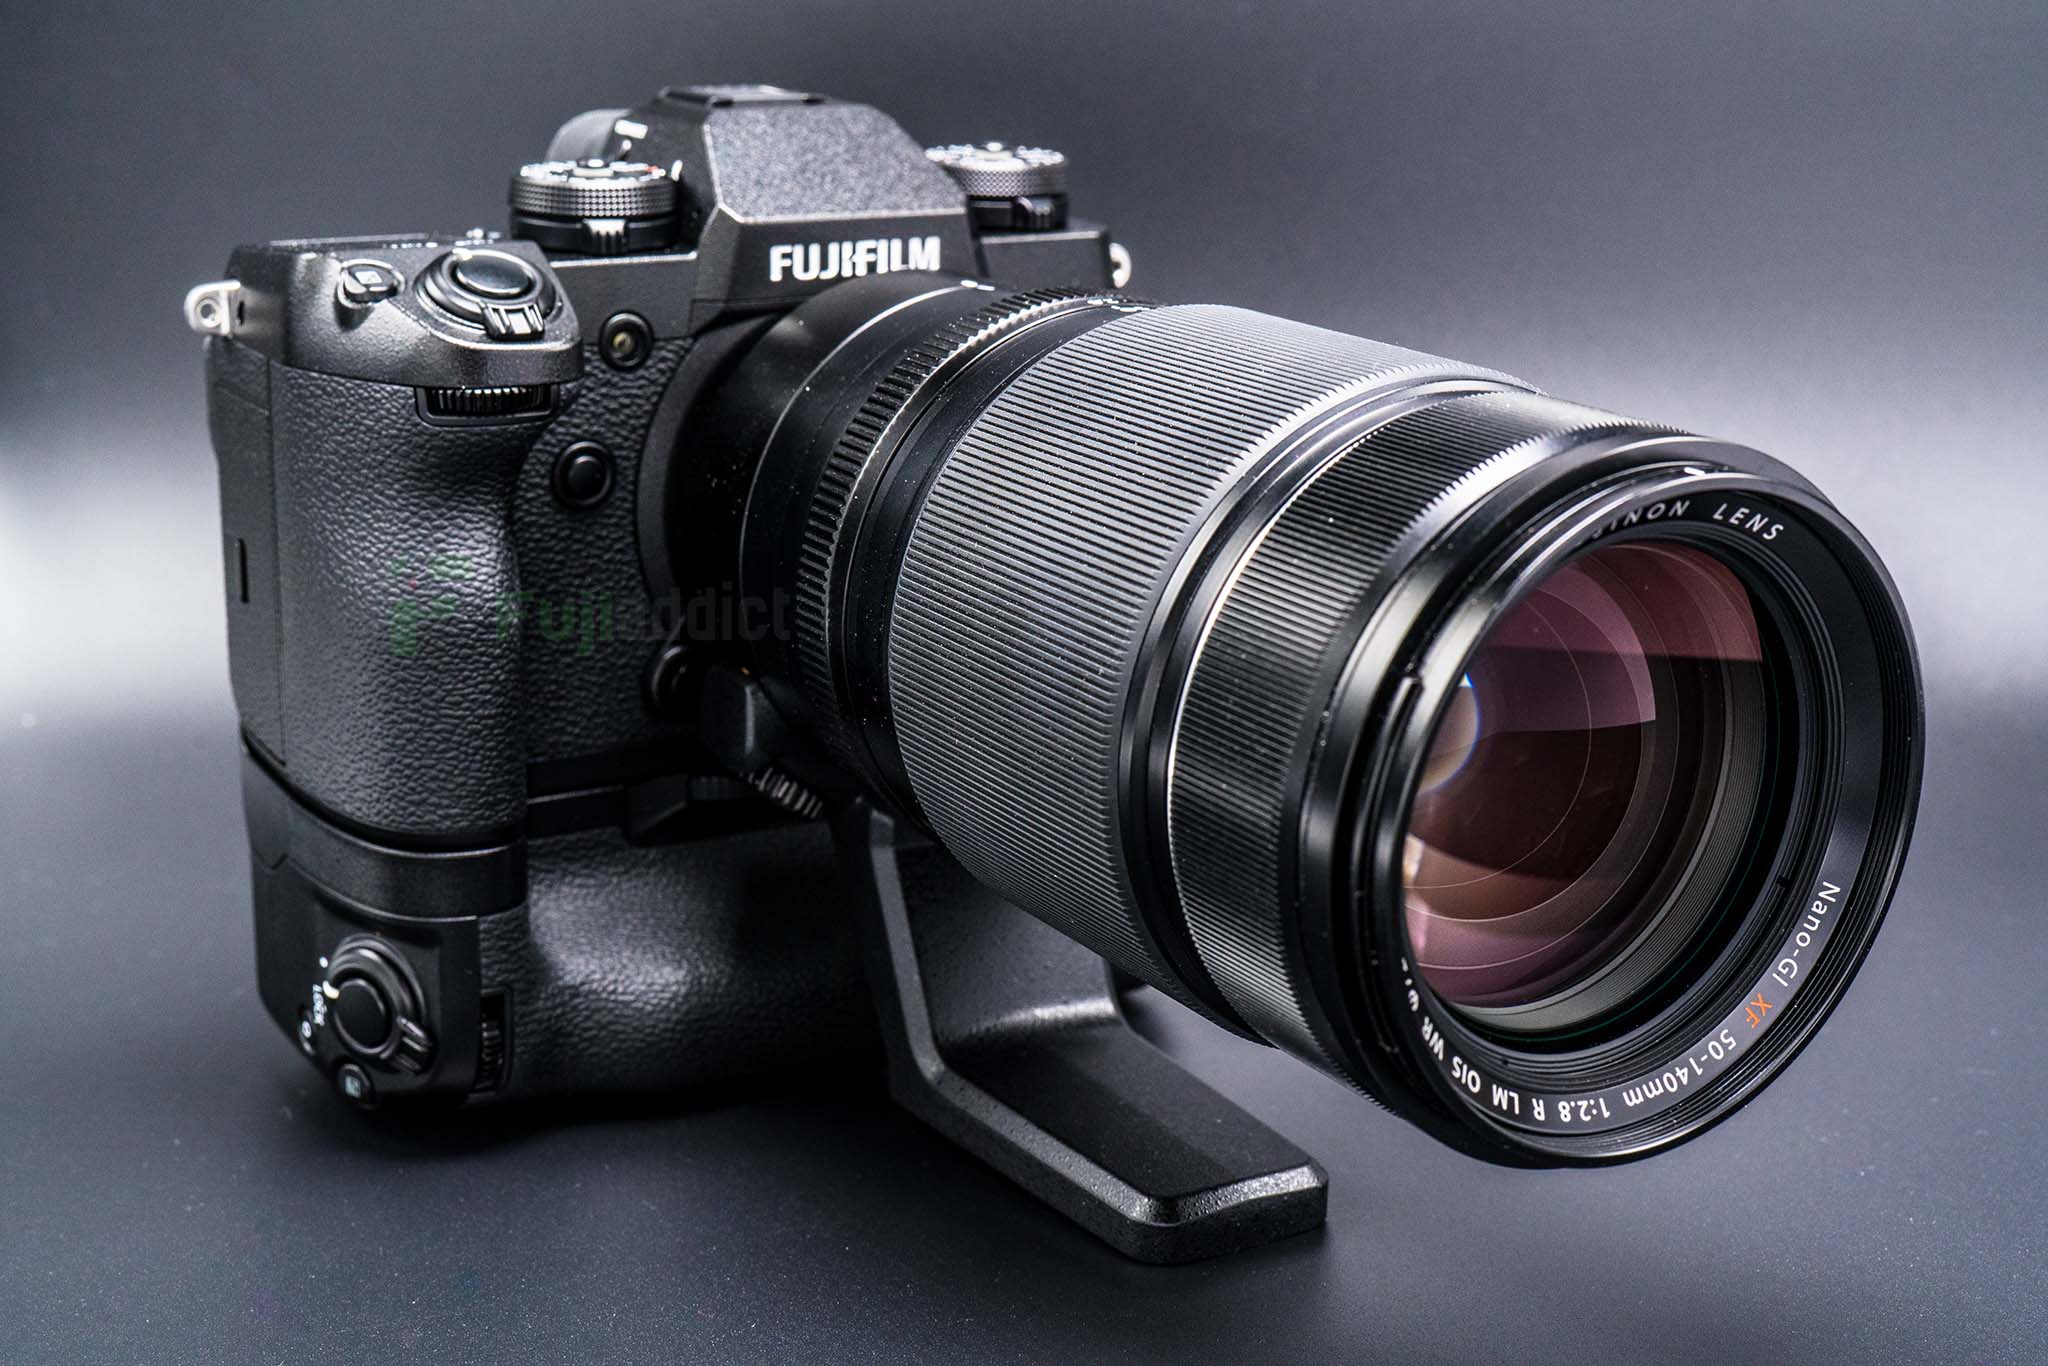 Fujifilm X H1 And X T2 Updates Released And Fujifilm Gfx And X Pro2 Updates Delayed Until July Fuji Addict